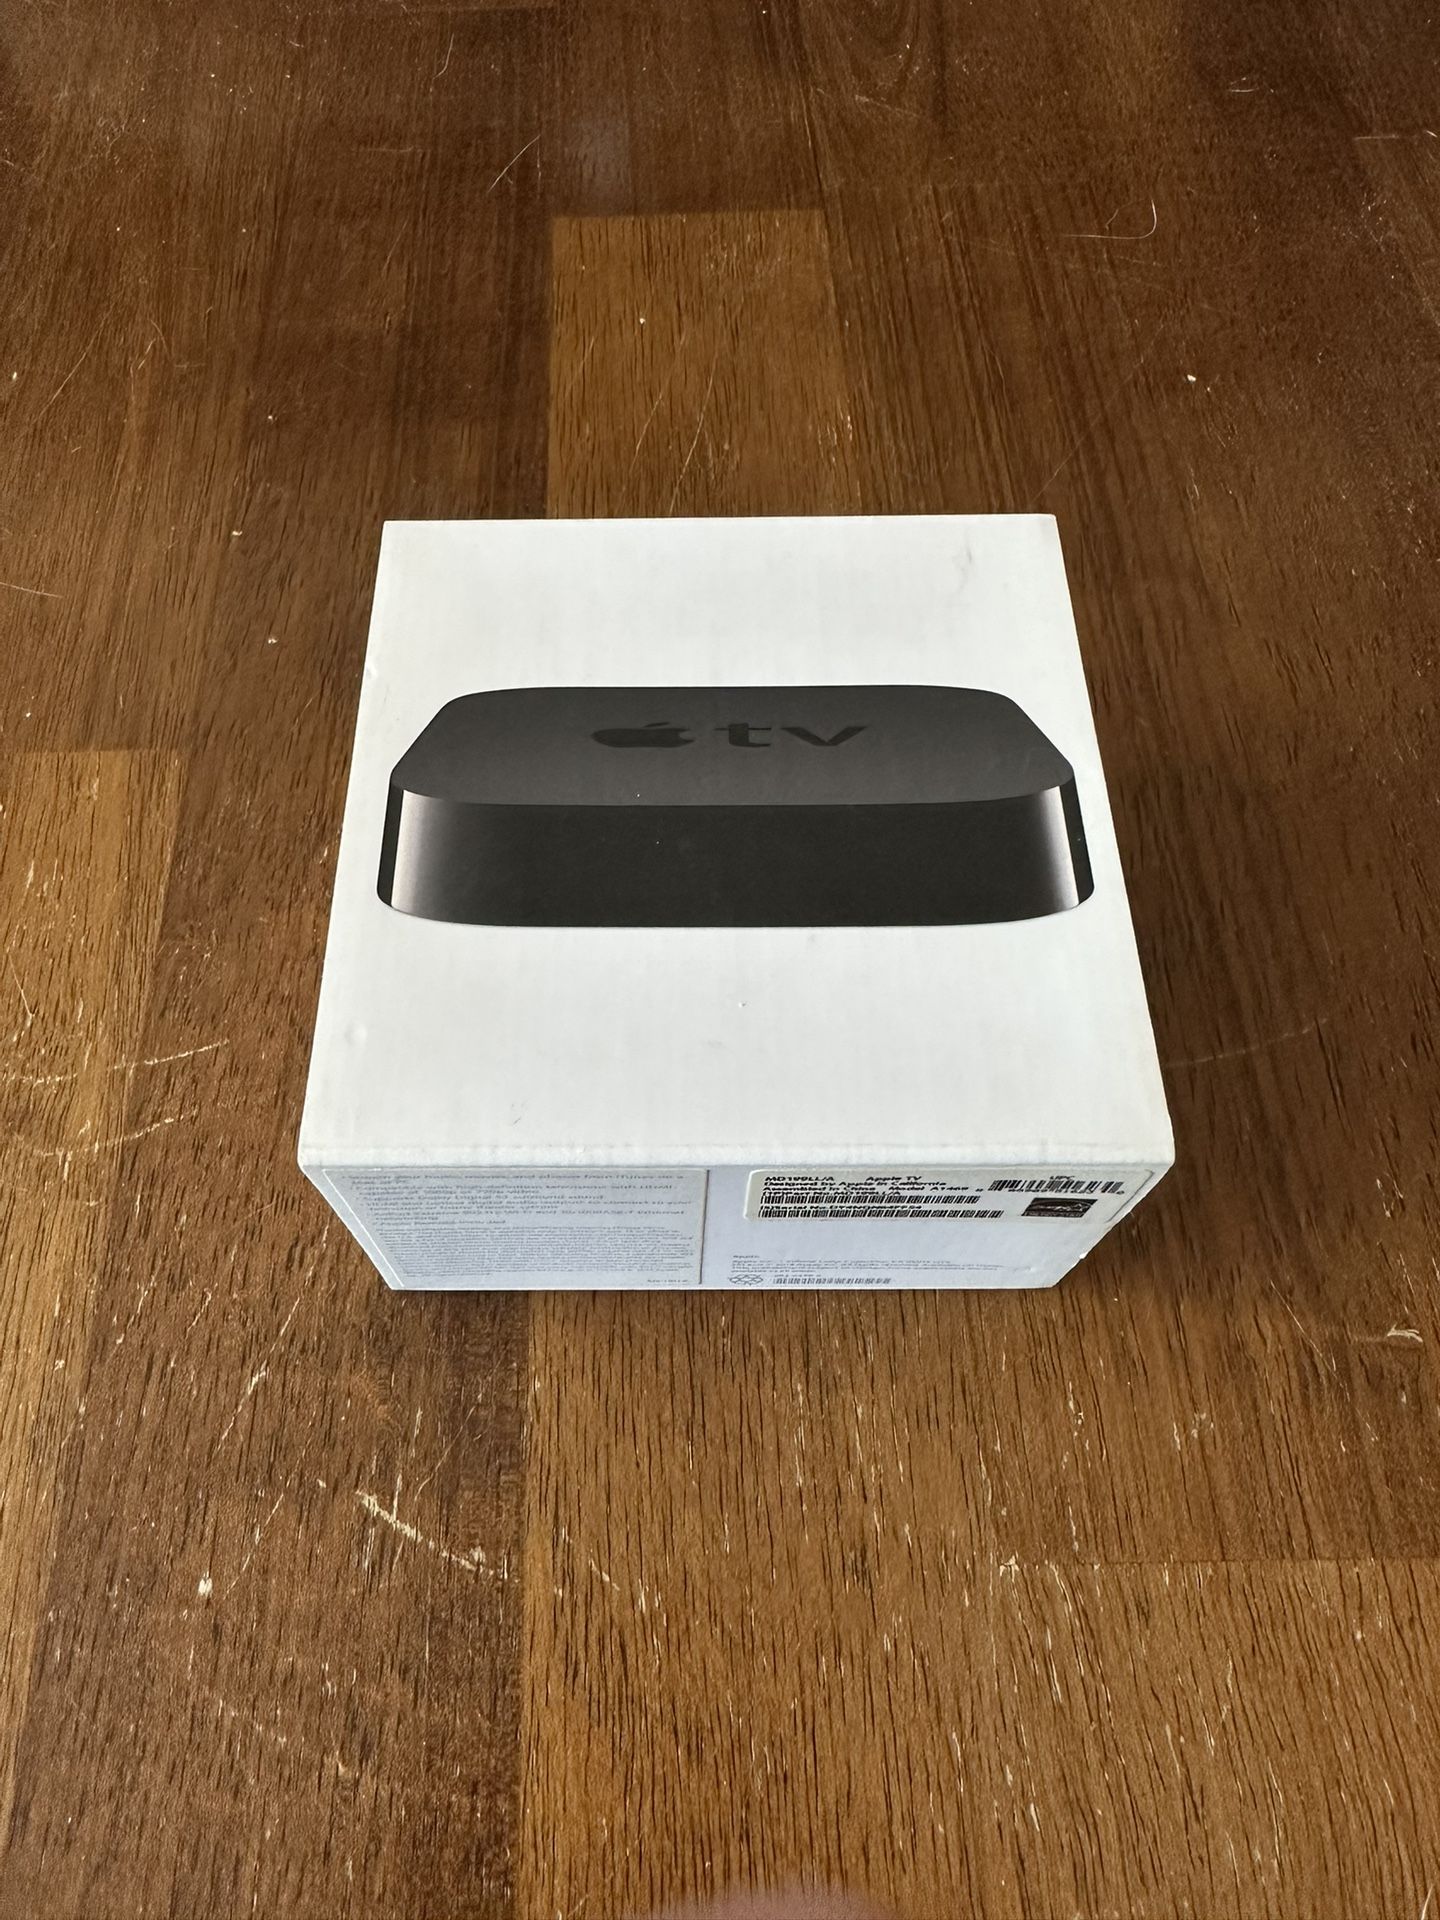 Apple TV (3rd Generation; A1469) (NO REMOTE/POWER CABLE)